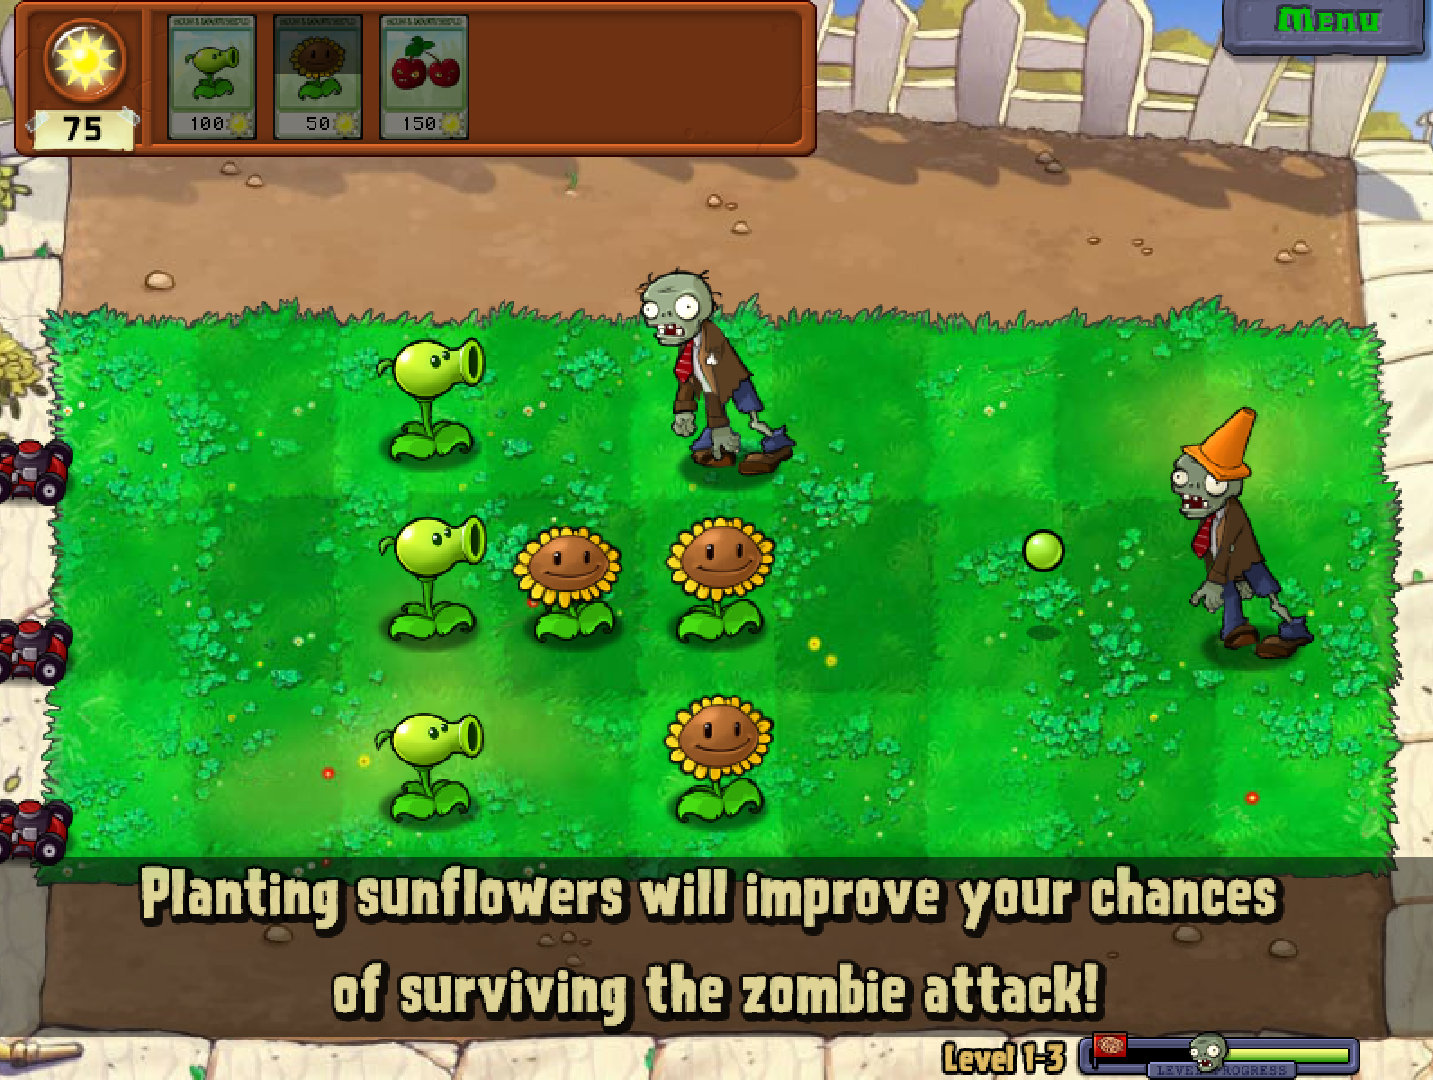 ScreenCap from game "Plants vs Zombies"